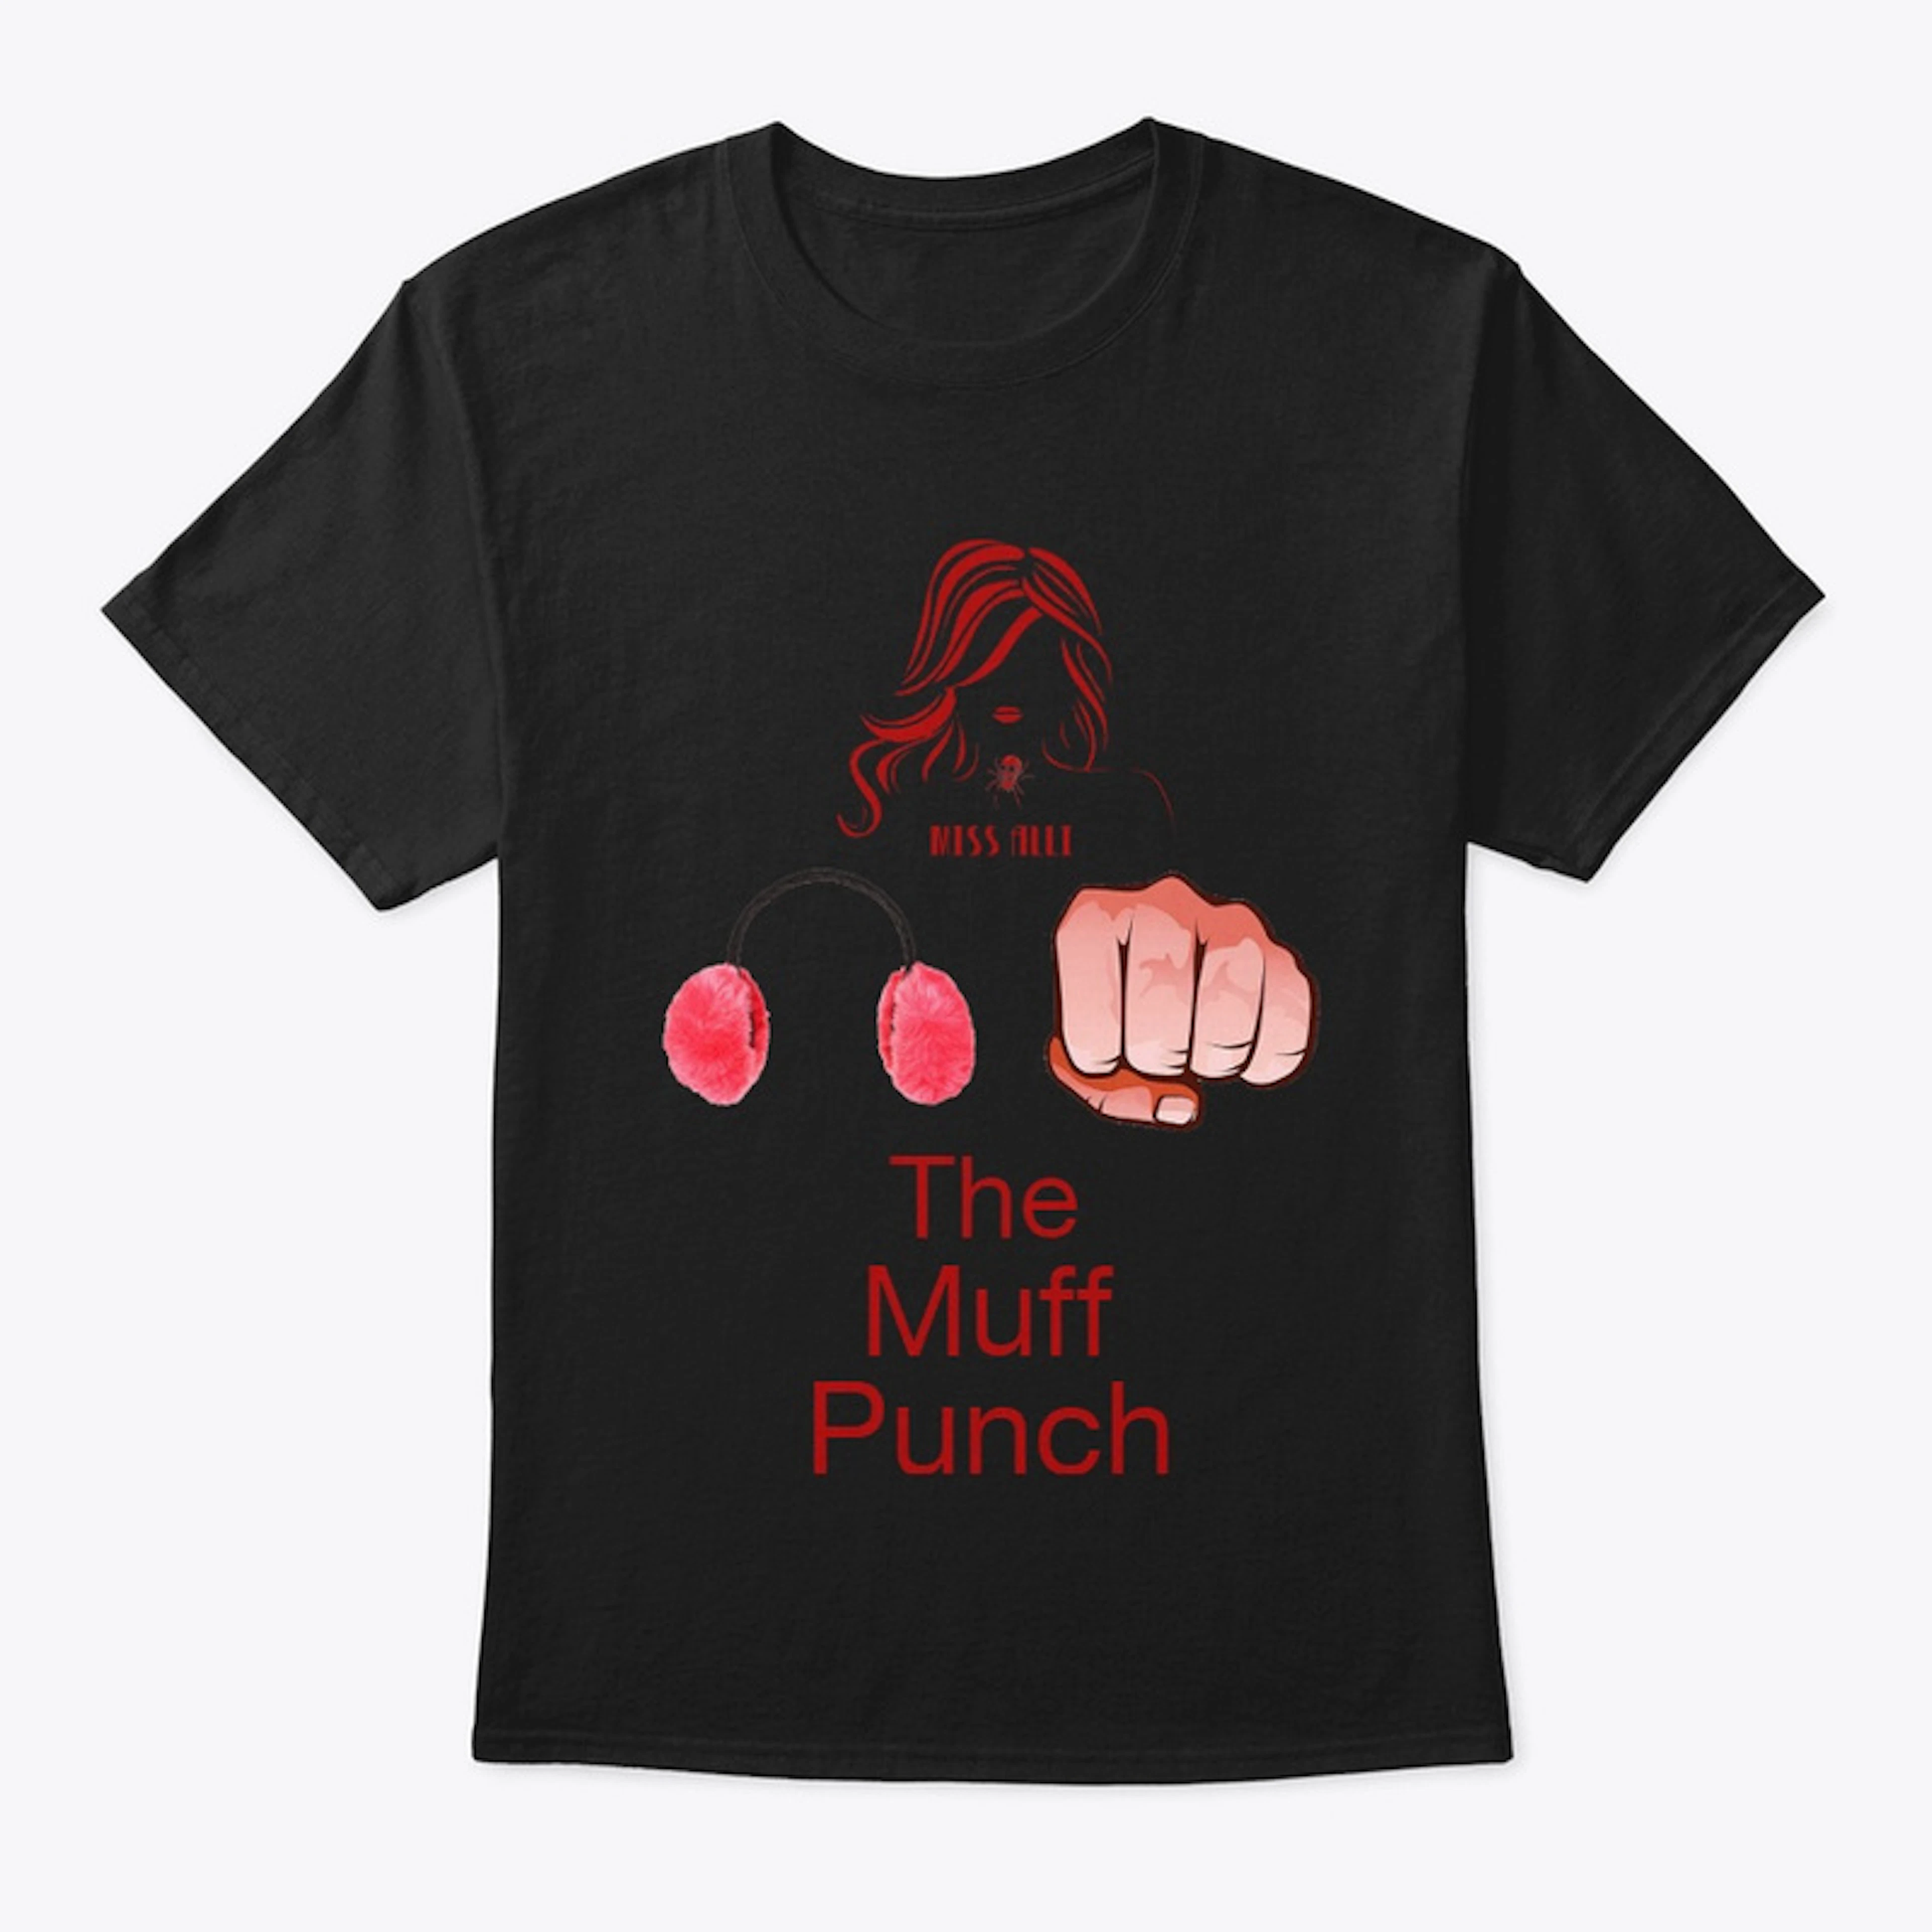 The Muff Punch and No Pants Party shirt